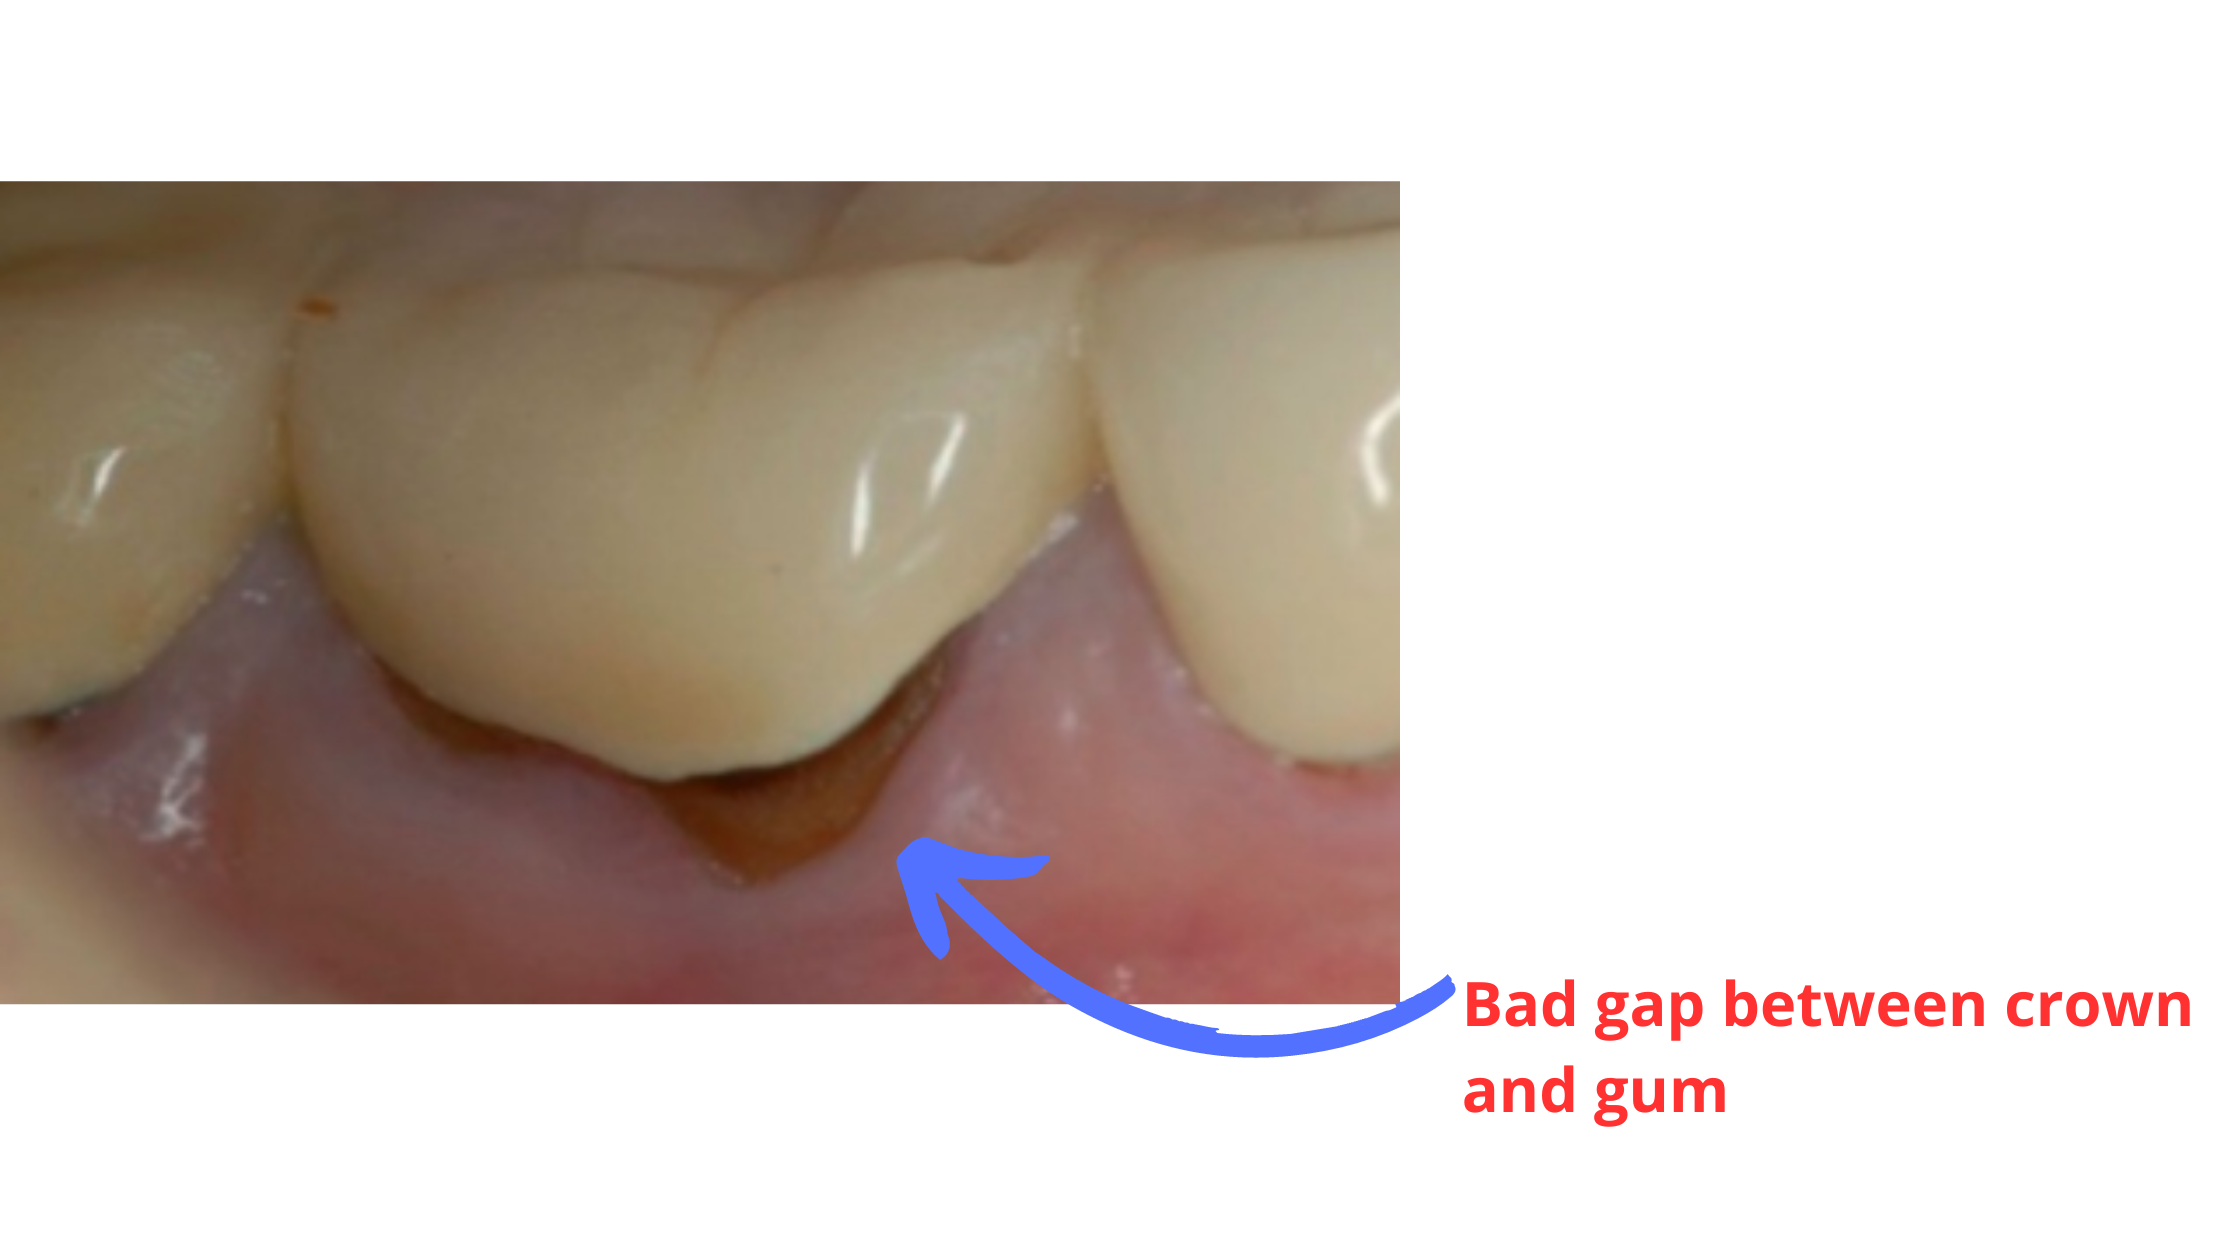 Bad gap between crown and gum (clinical image showing signs of darkening and decay along the gingival line)